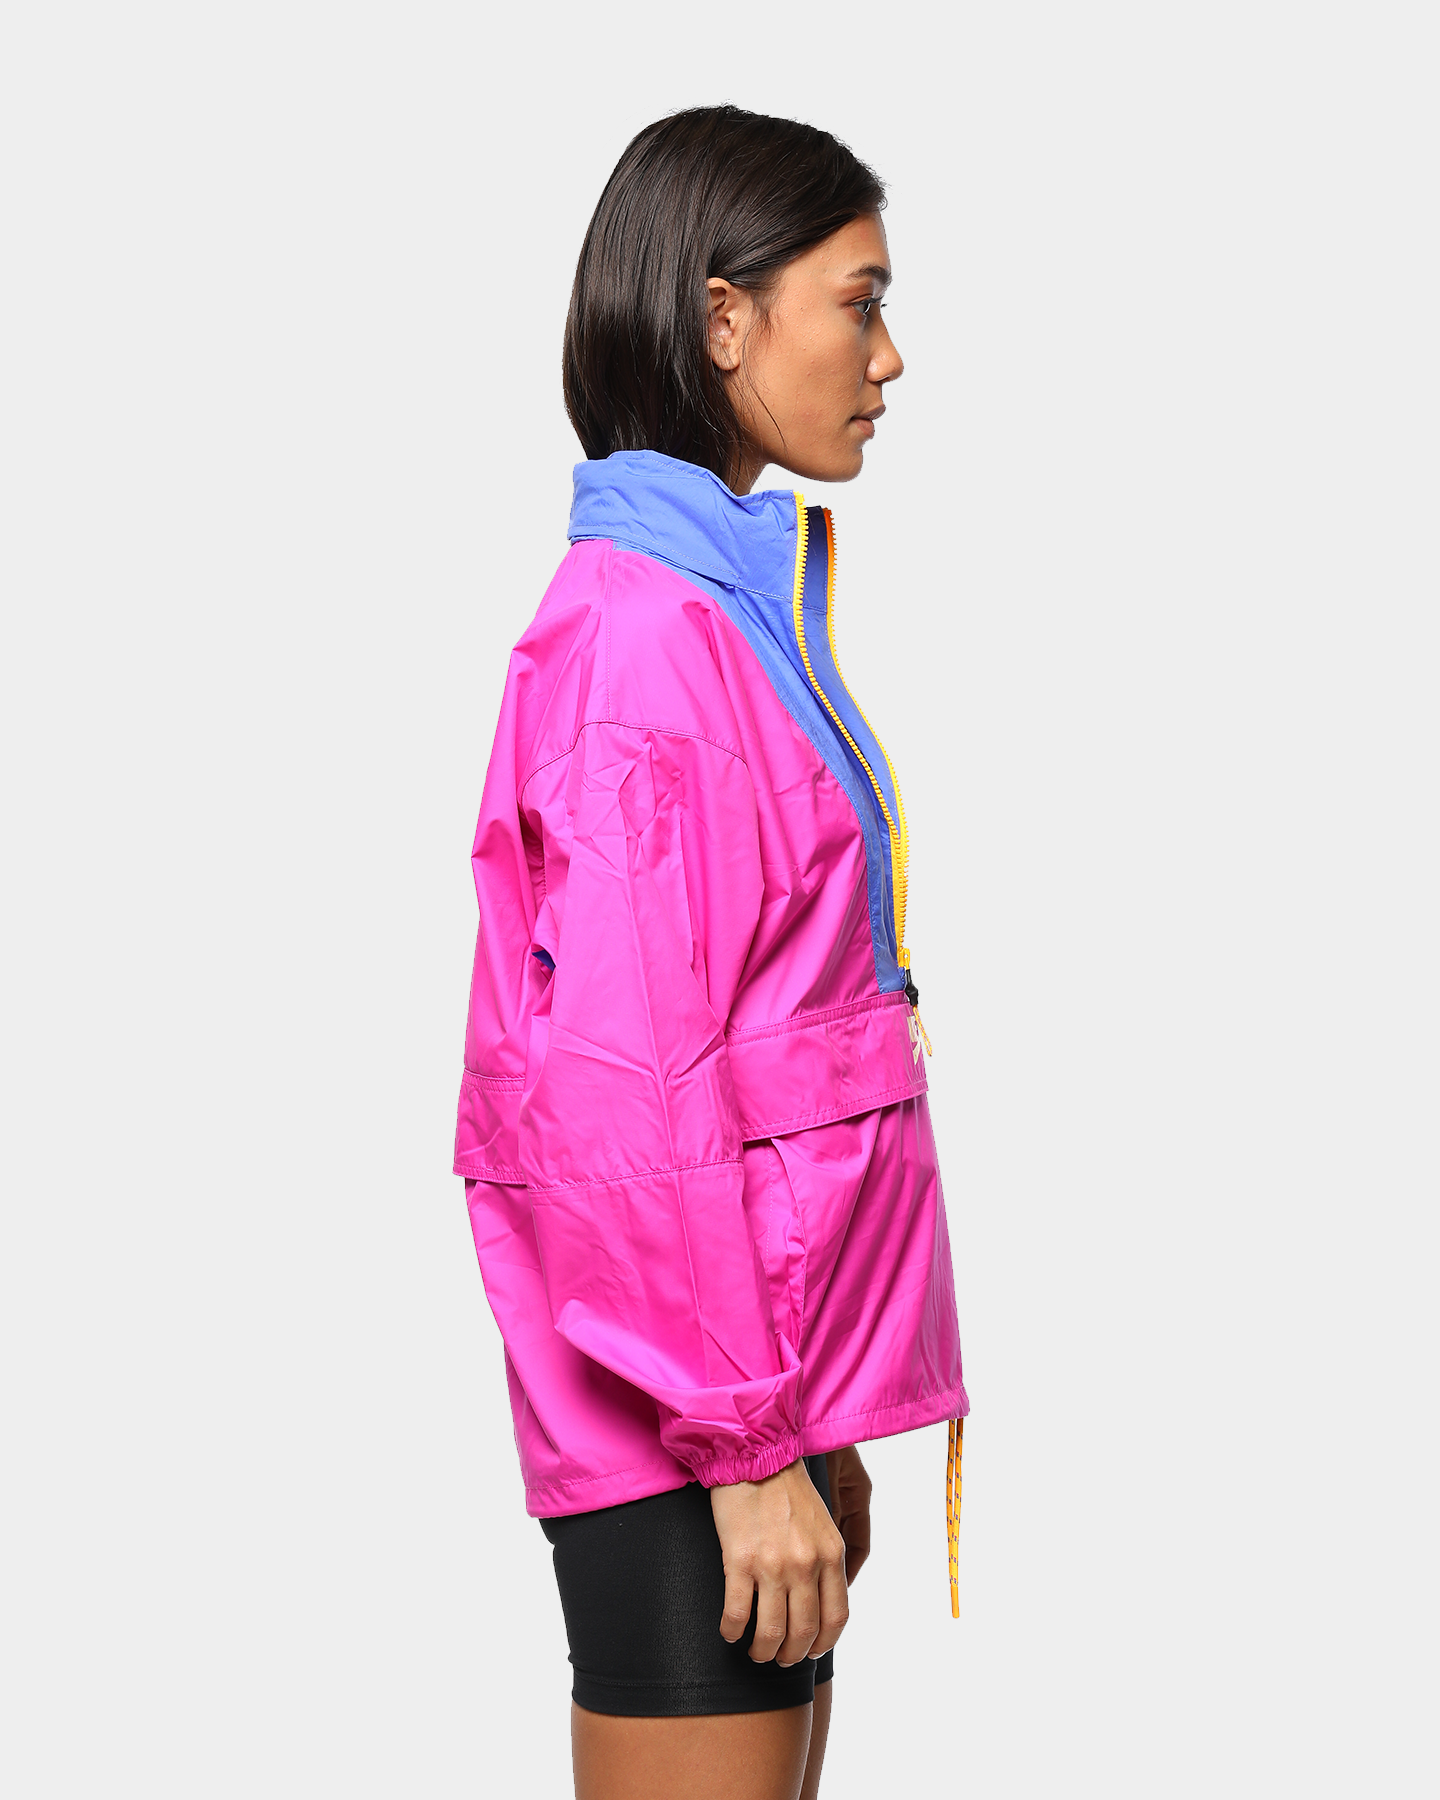 nike icon clash jacket fire pink